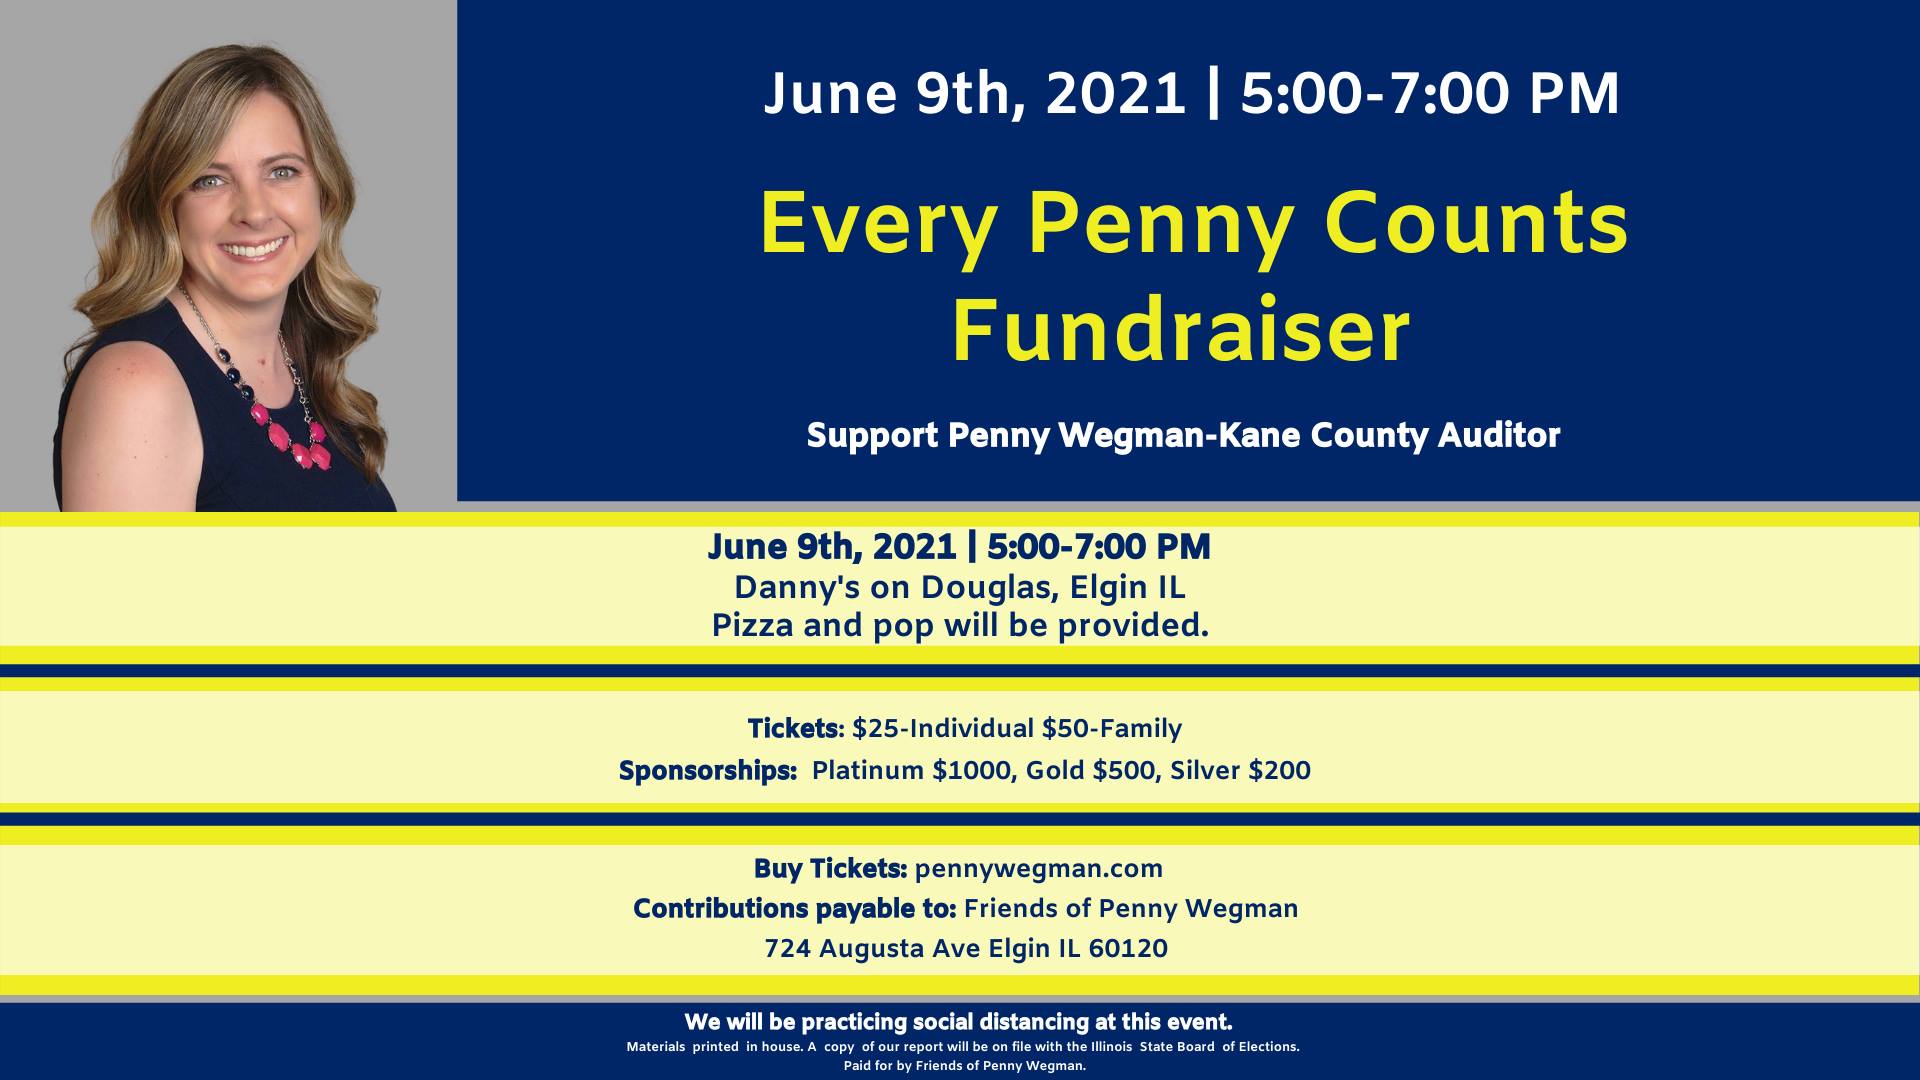 Every Penny Counts Fundraiser June 9 2021